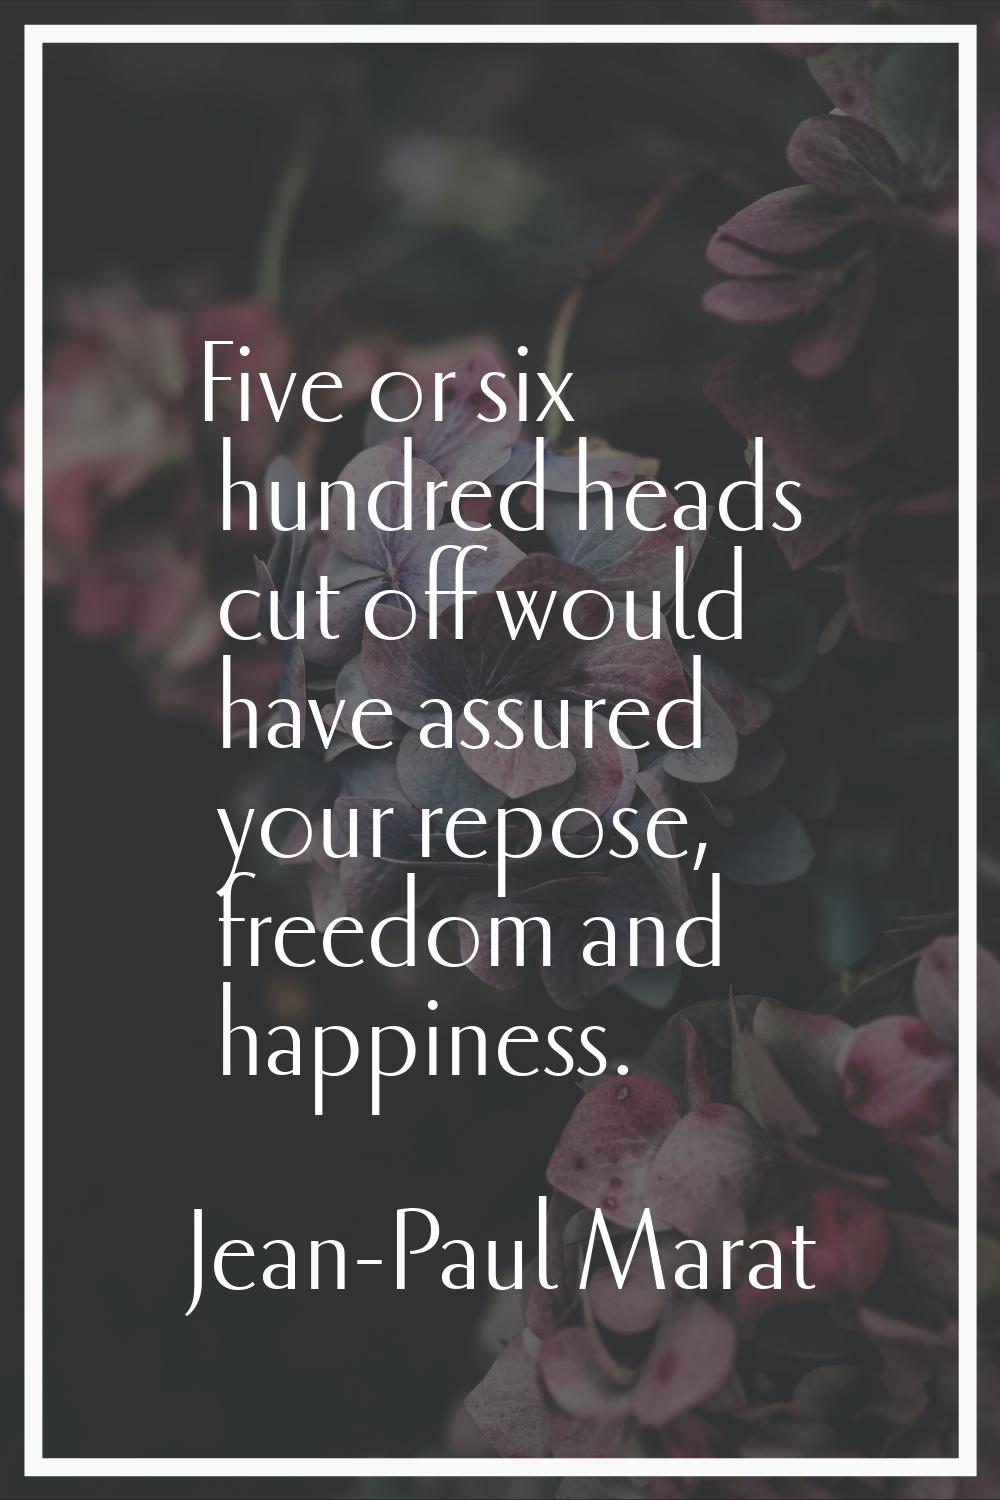 Five or six hundred heads cut off would have assured your repose, freedom and happiness.